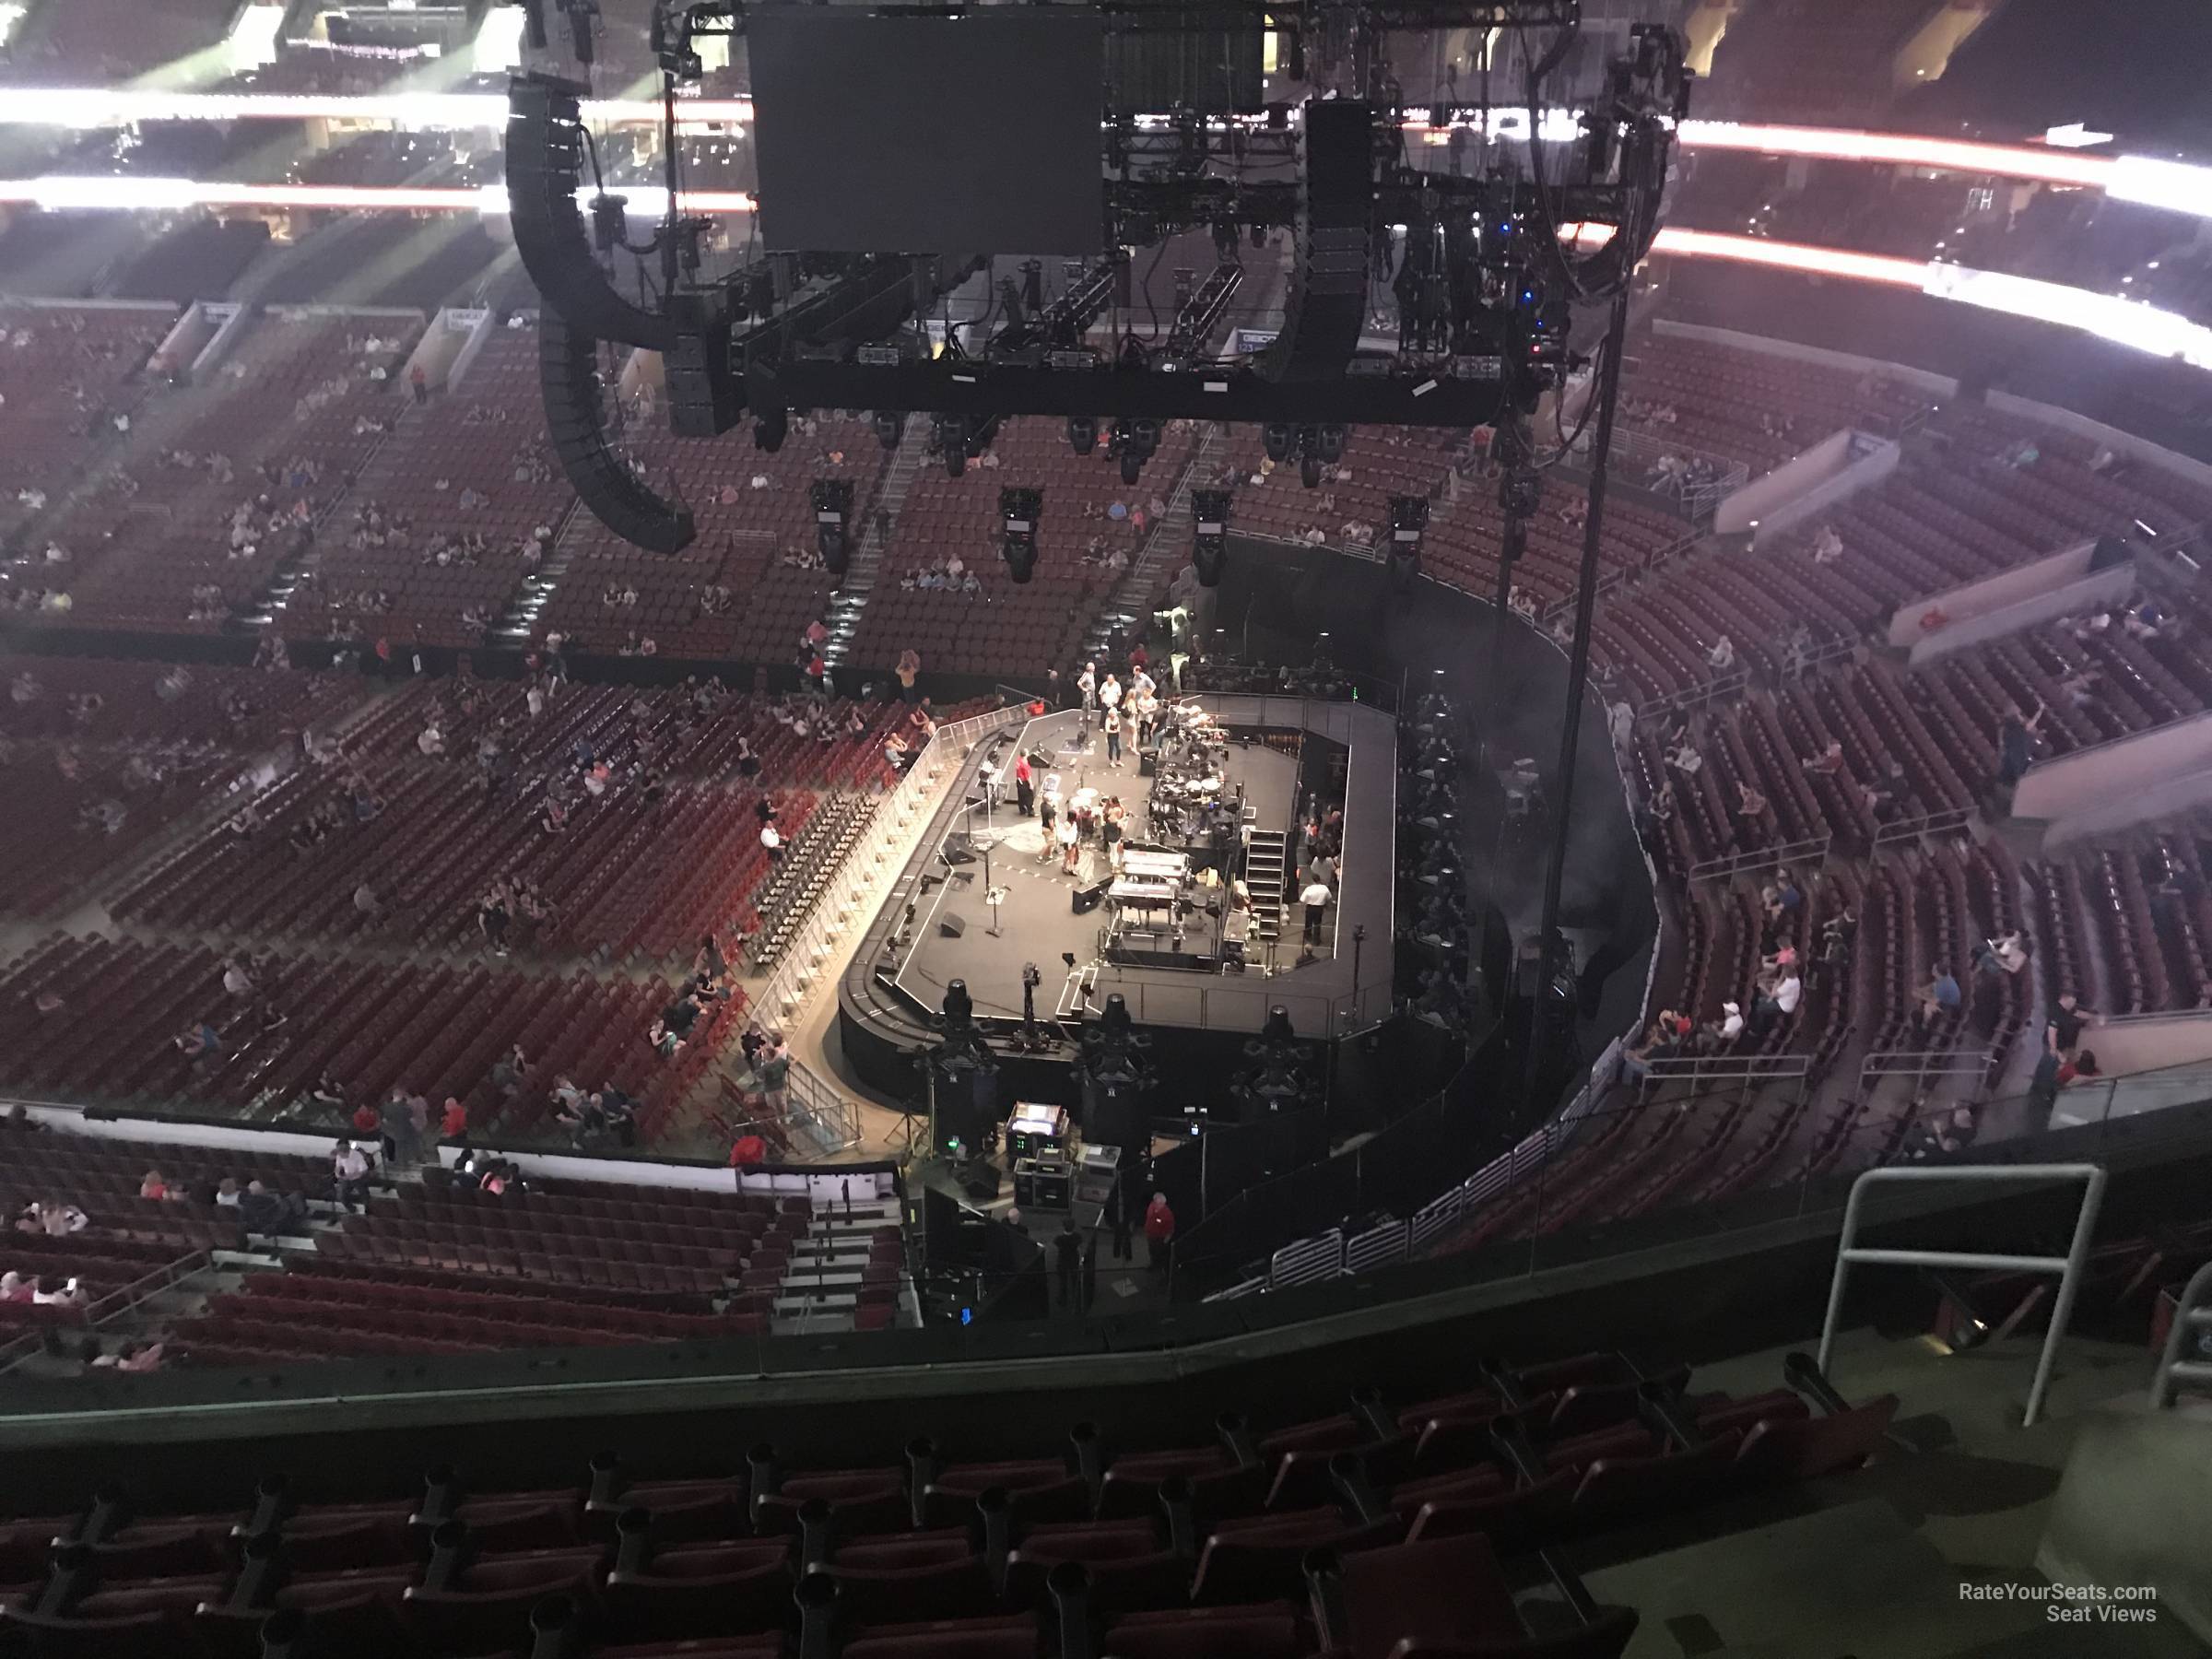 section 215, row 7 seat view  for concert - wells fargo center